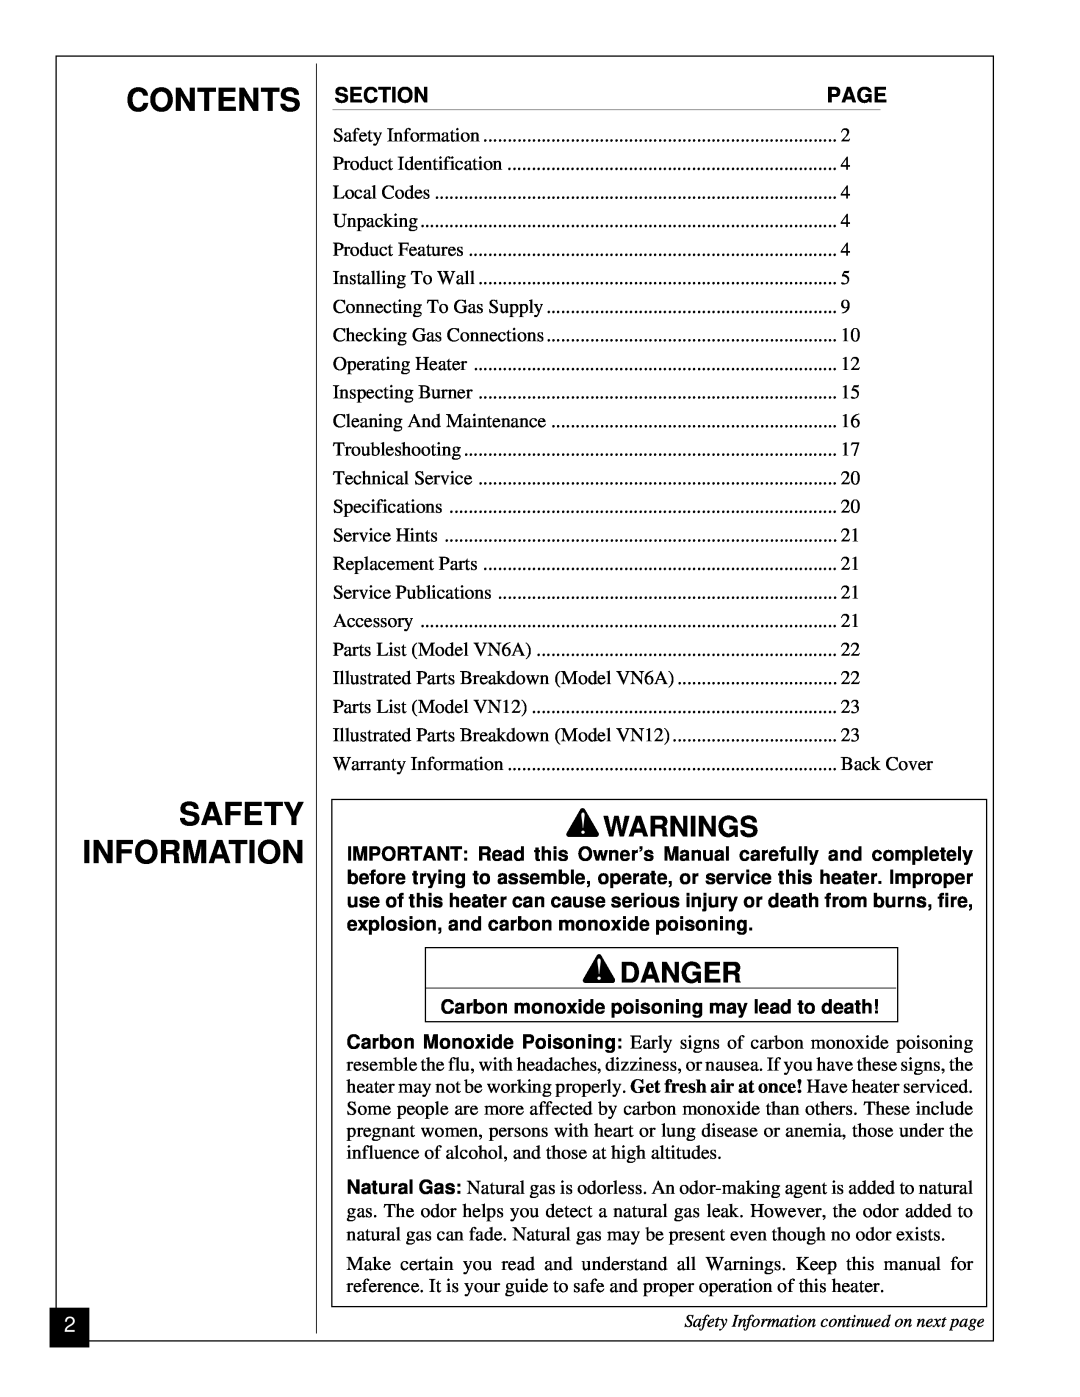 Vanguard Heating VN6A, VN12 installation manual Contents Safety Information, Warnings, Danger 